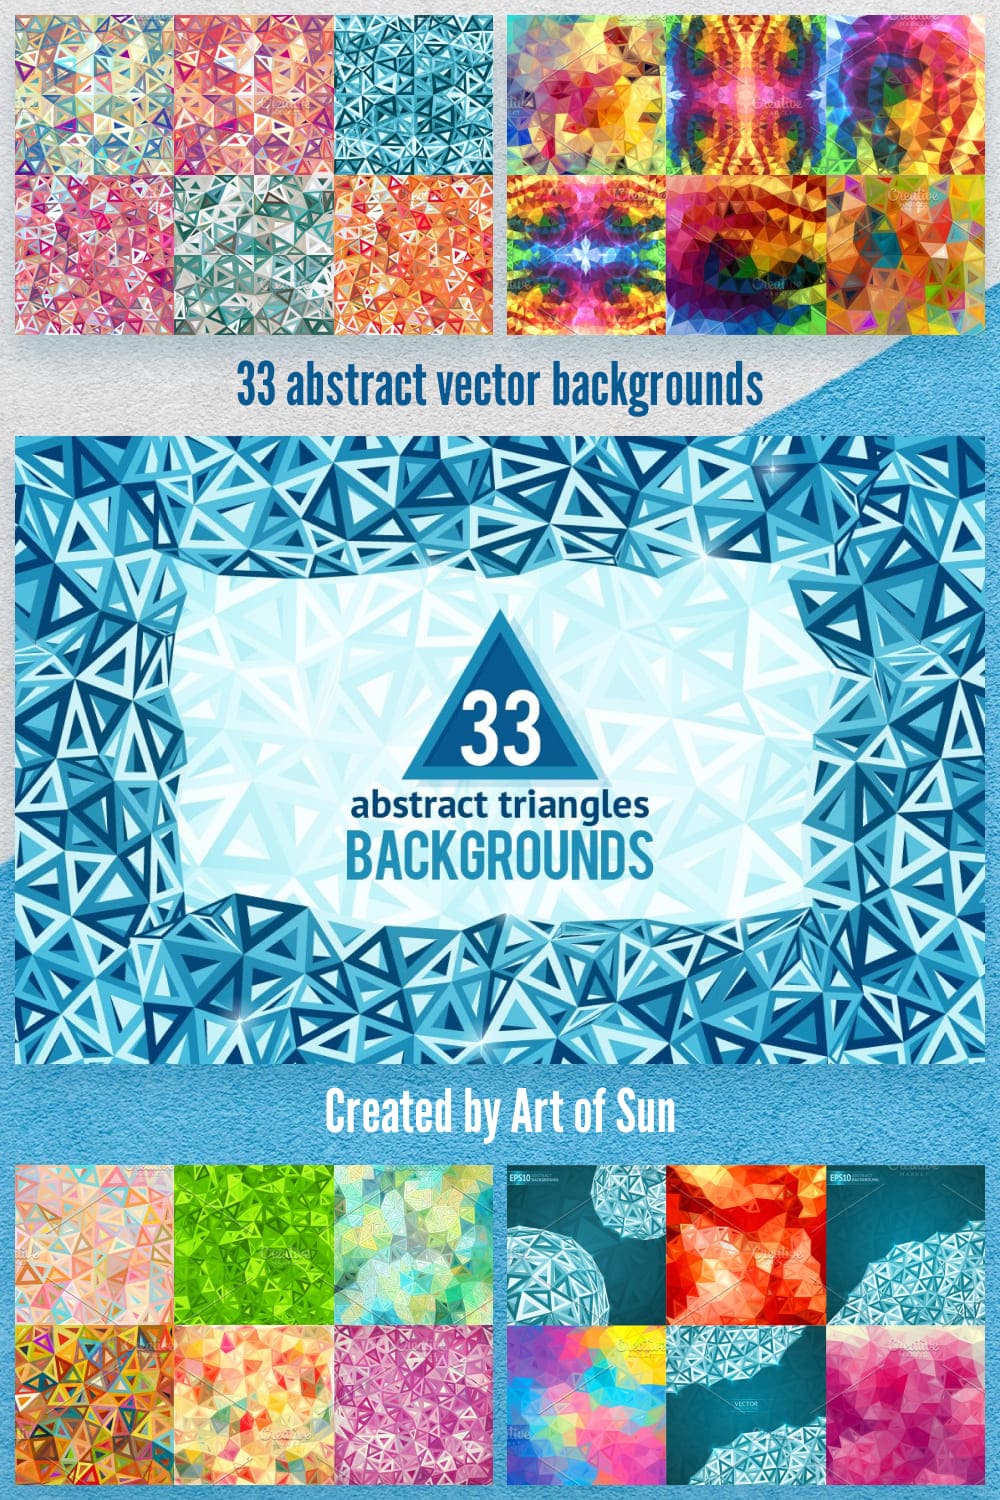 33 Abstract Vector Backgrounds pinterest image.